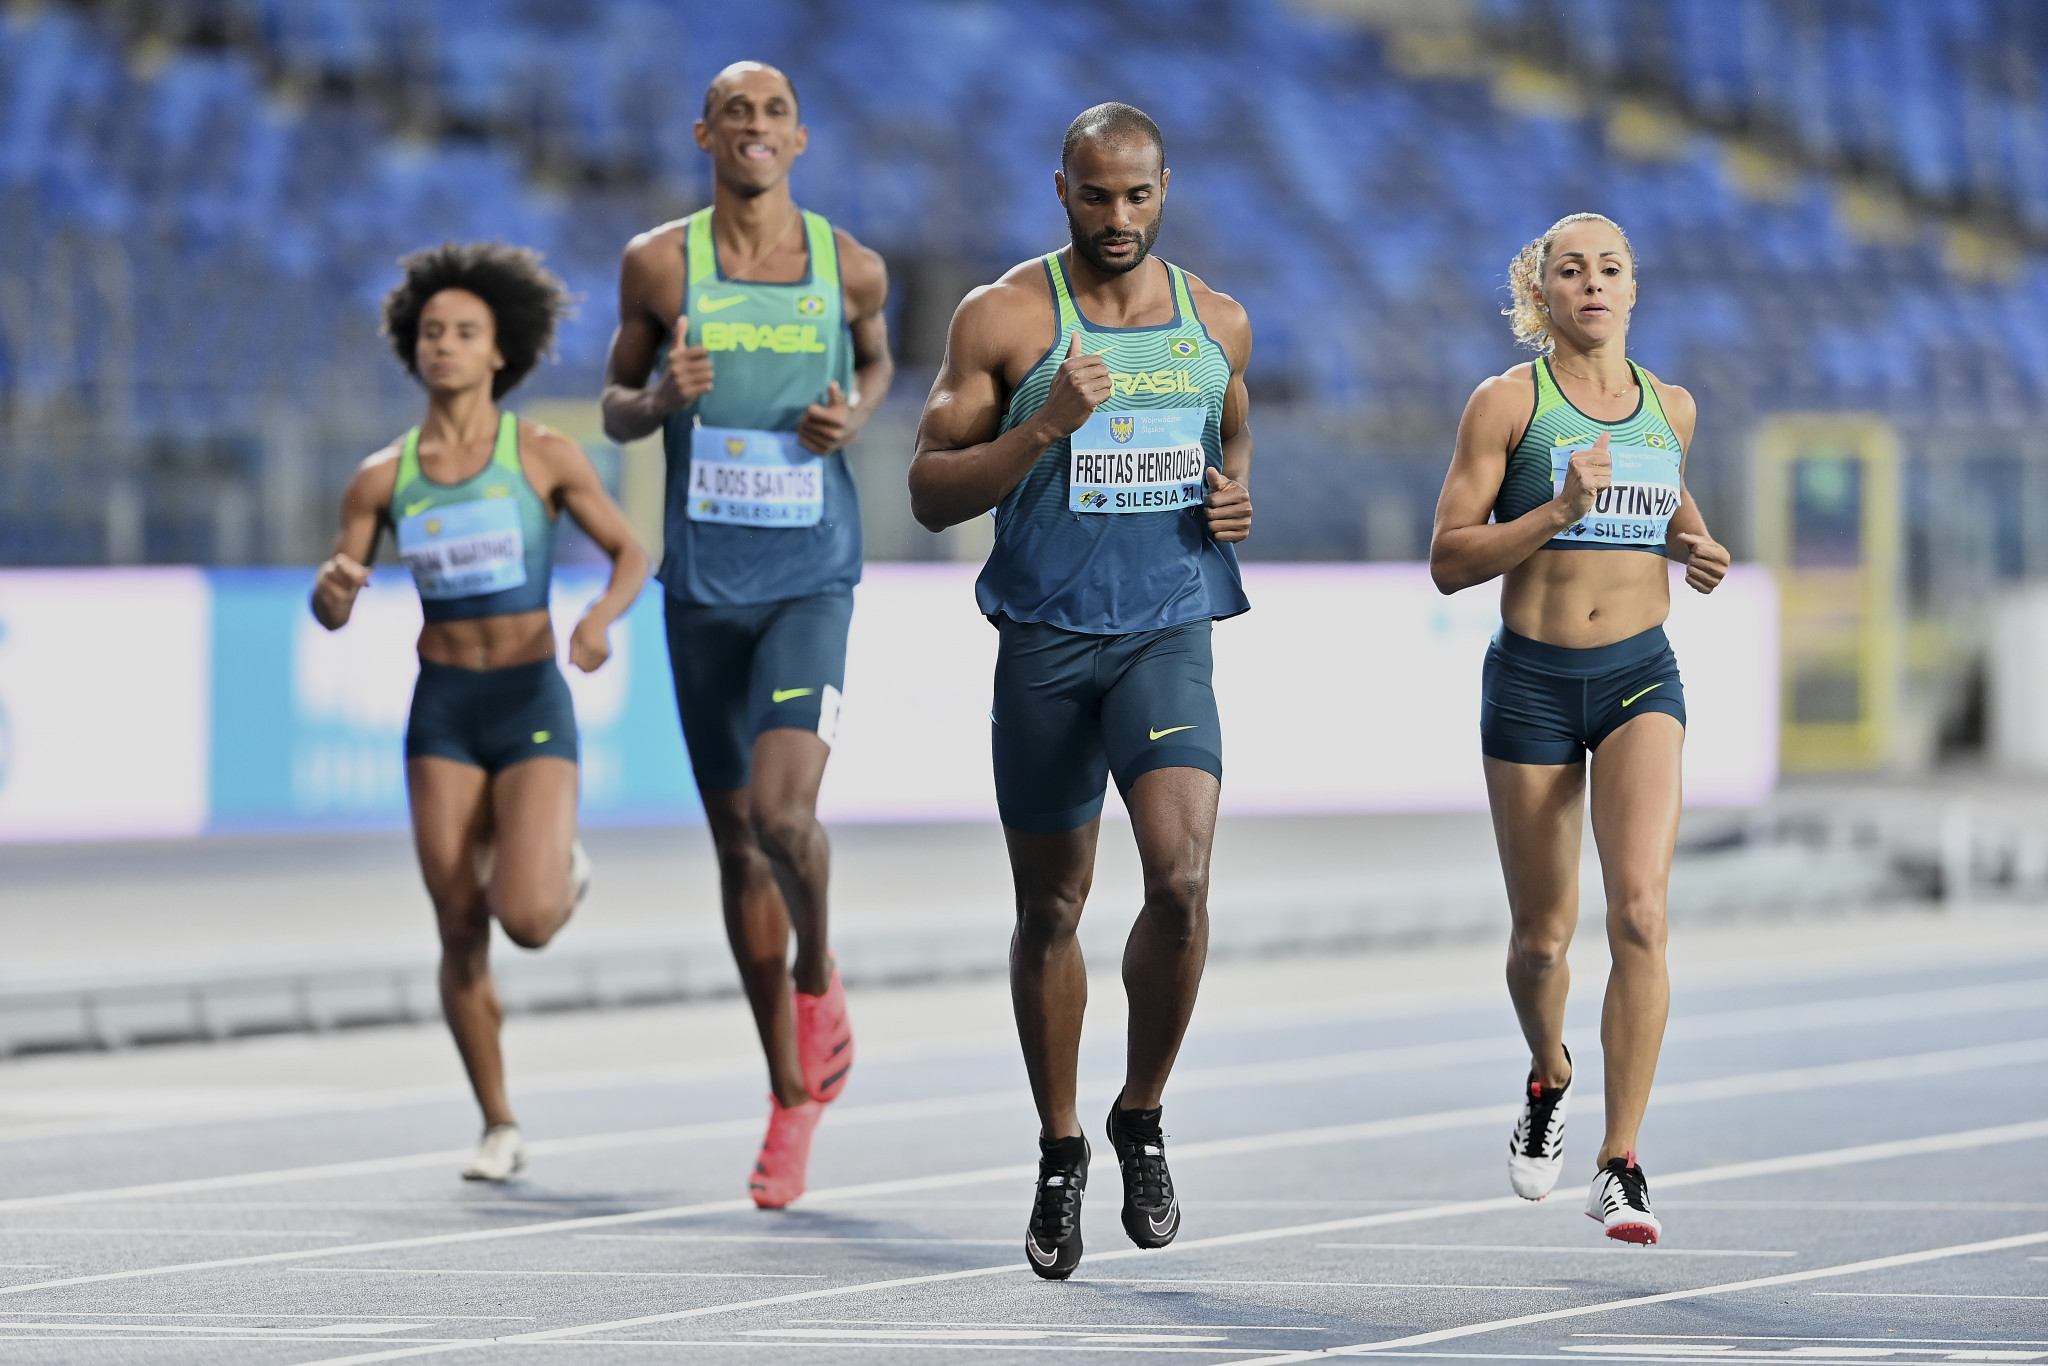 World Athletics announced that for future 400 metres mixed relay races at major Championships the order will be man, woman, man, woman ©Getty Images